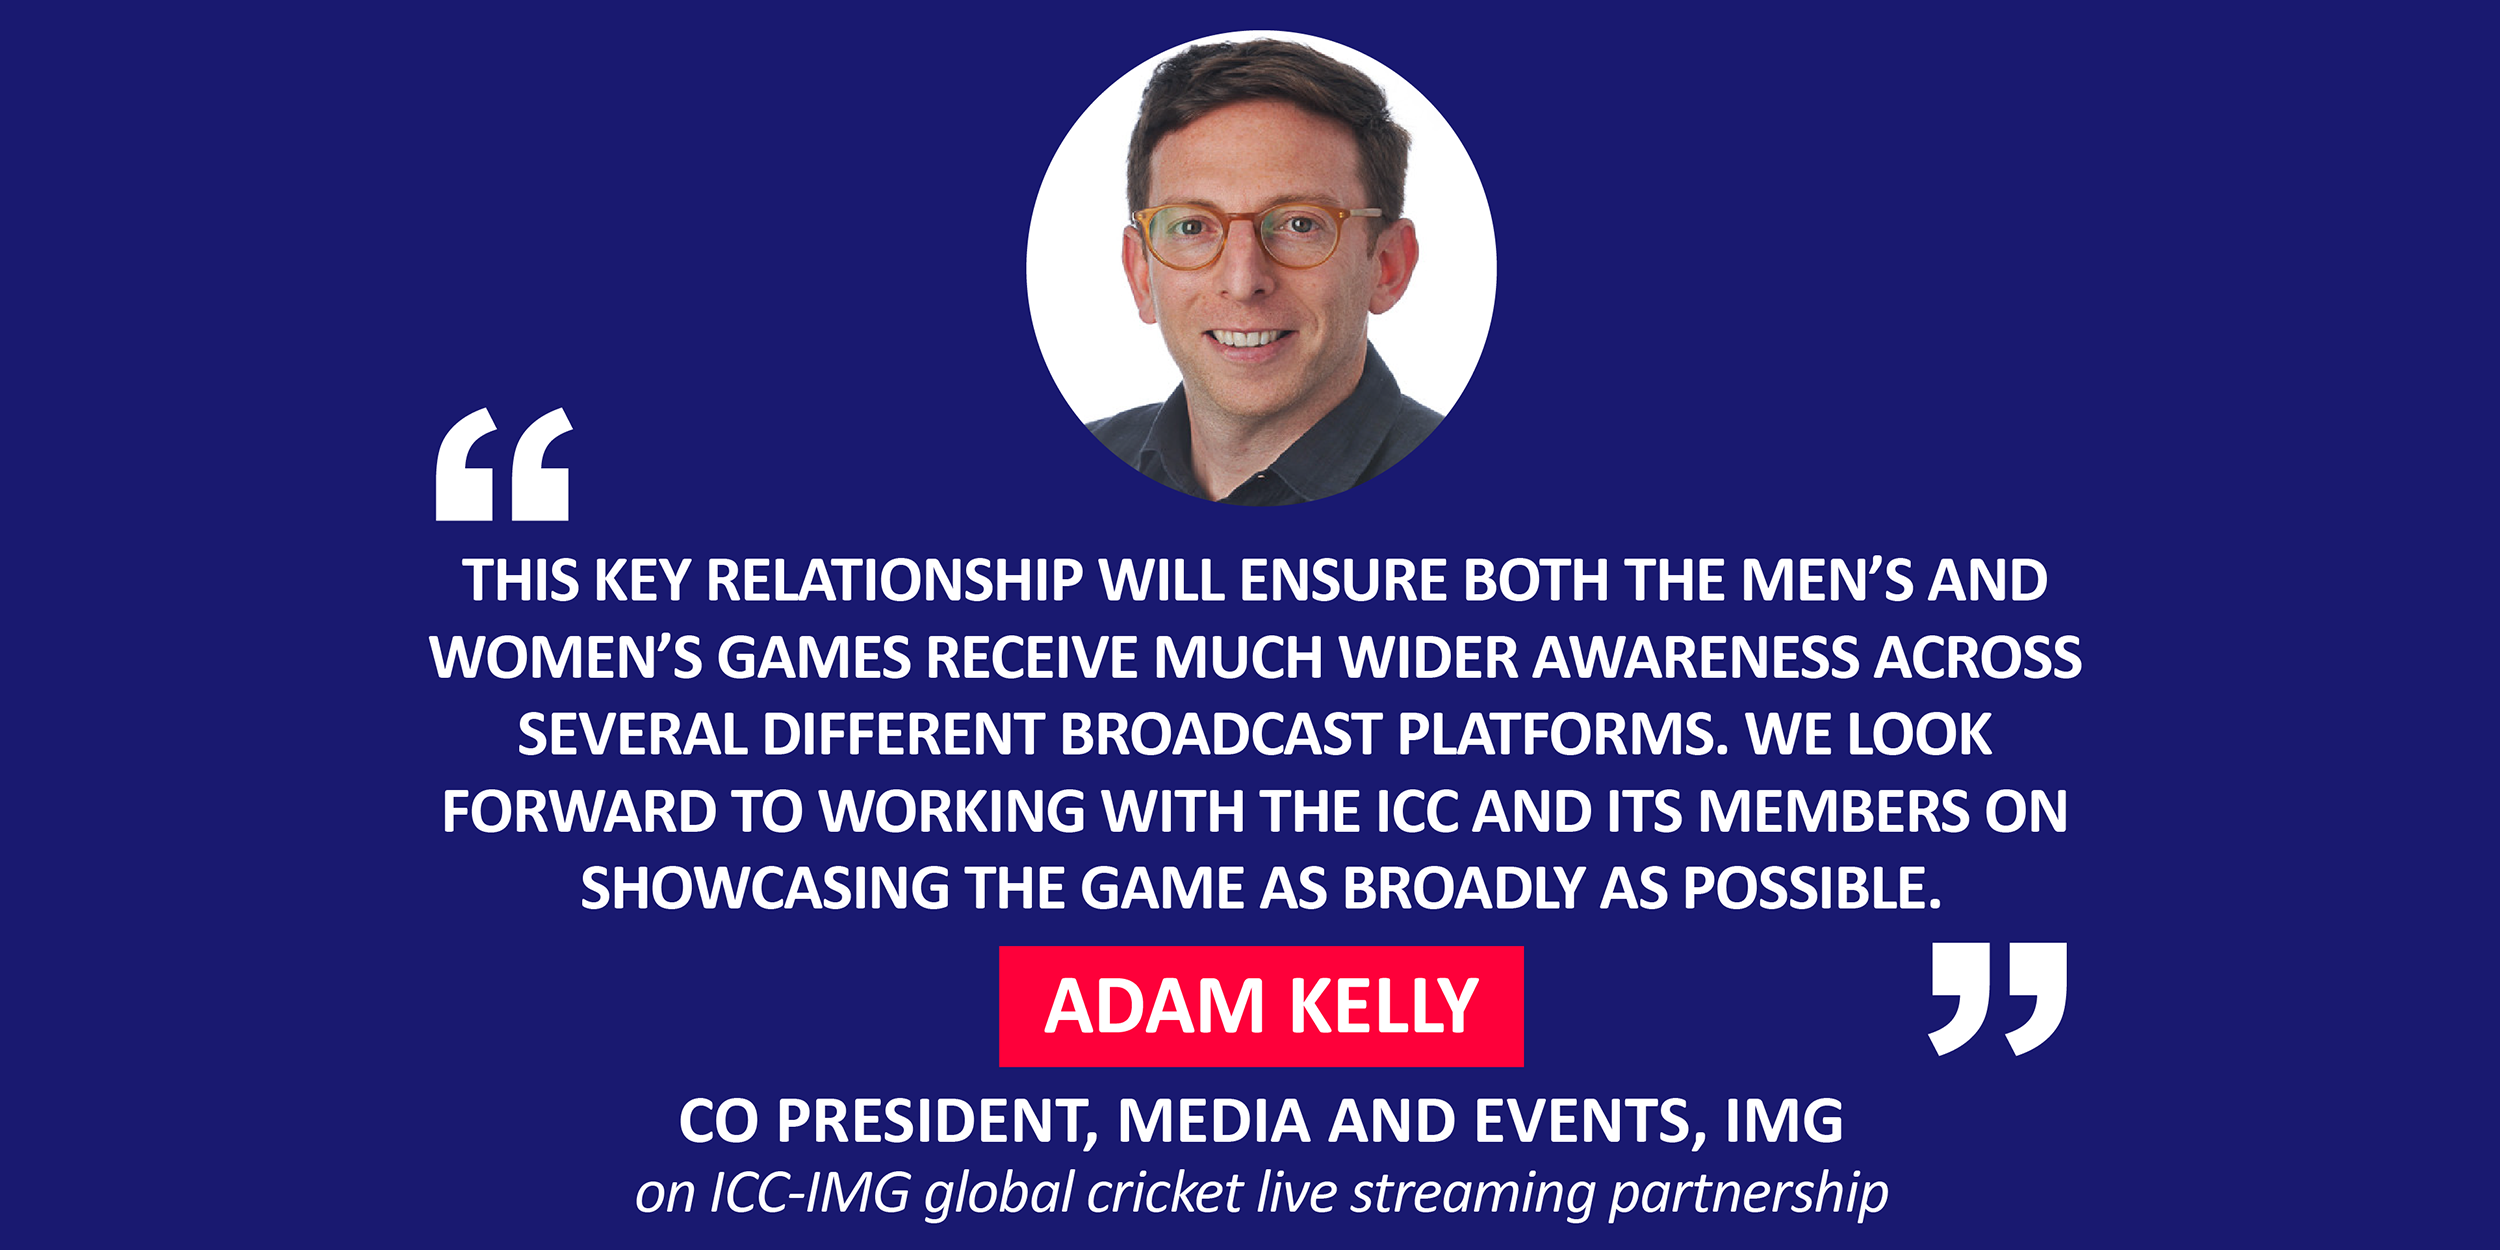 Adam Kelly, Co President, Media and Events, IMG on ICC-IMG global cricket live streaming partnership